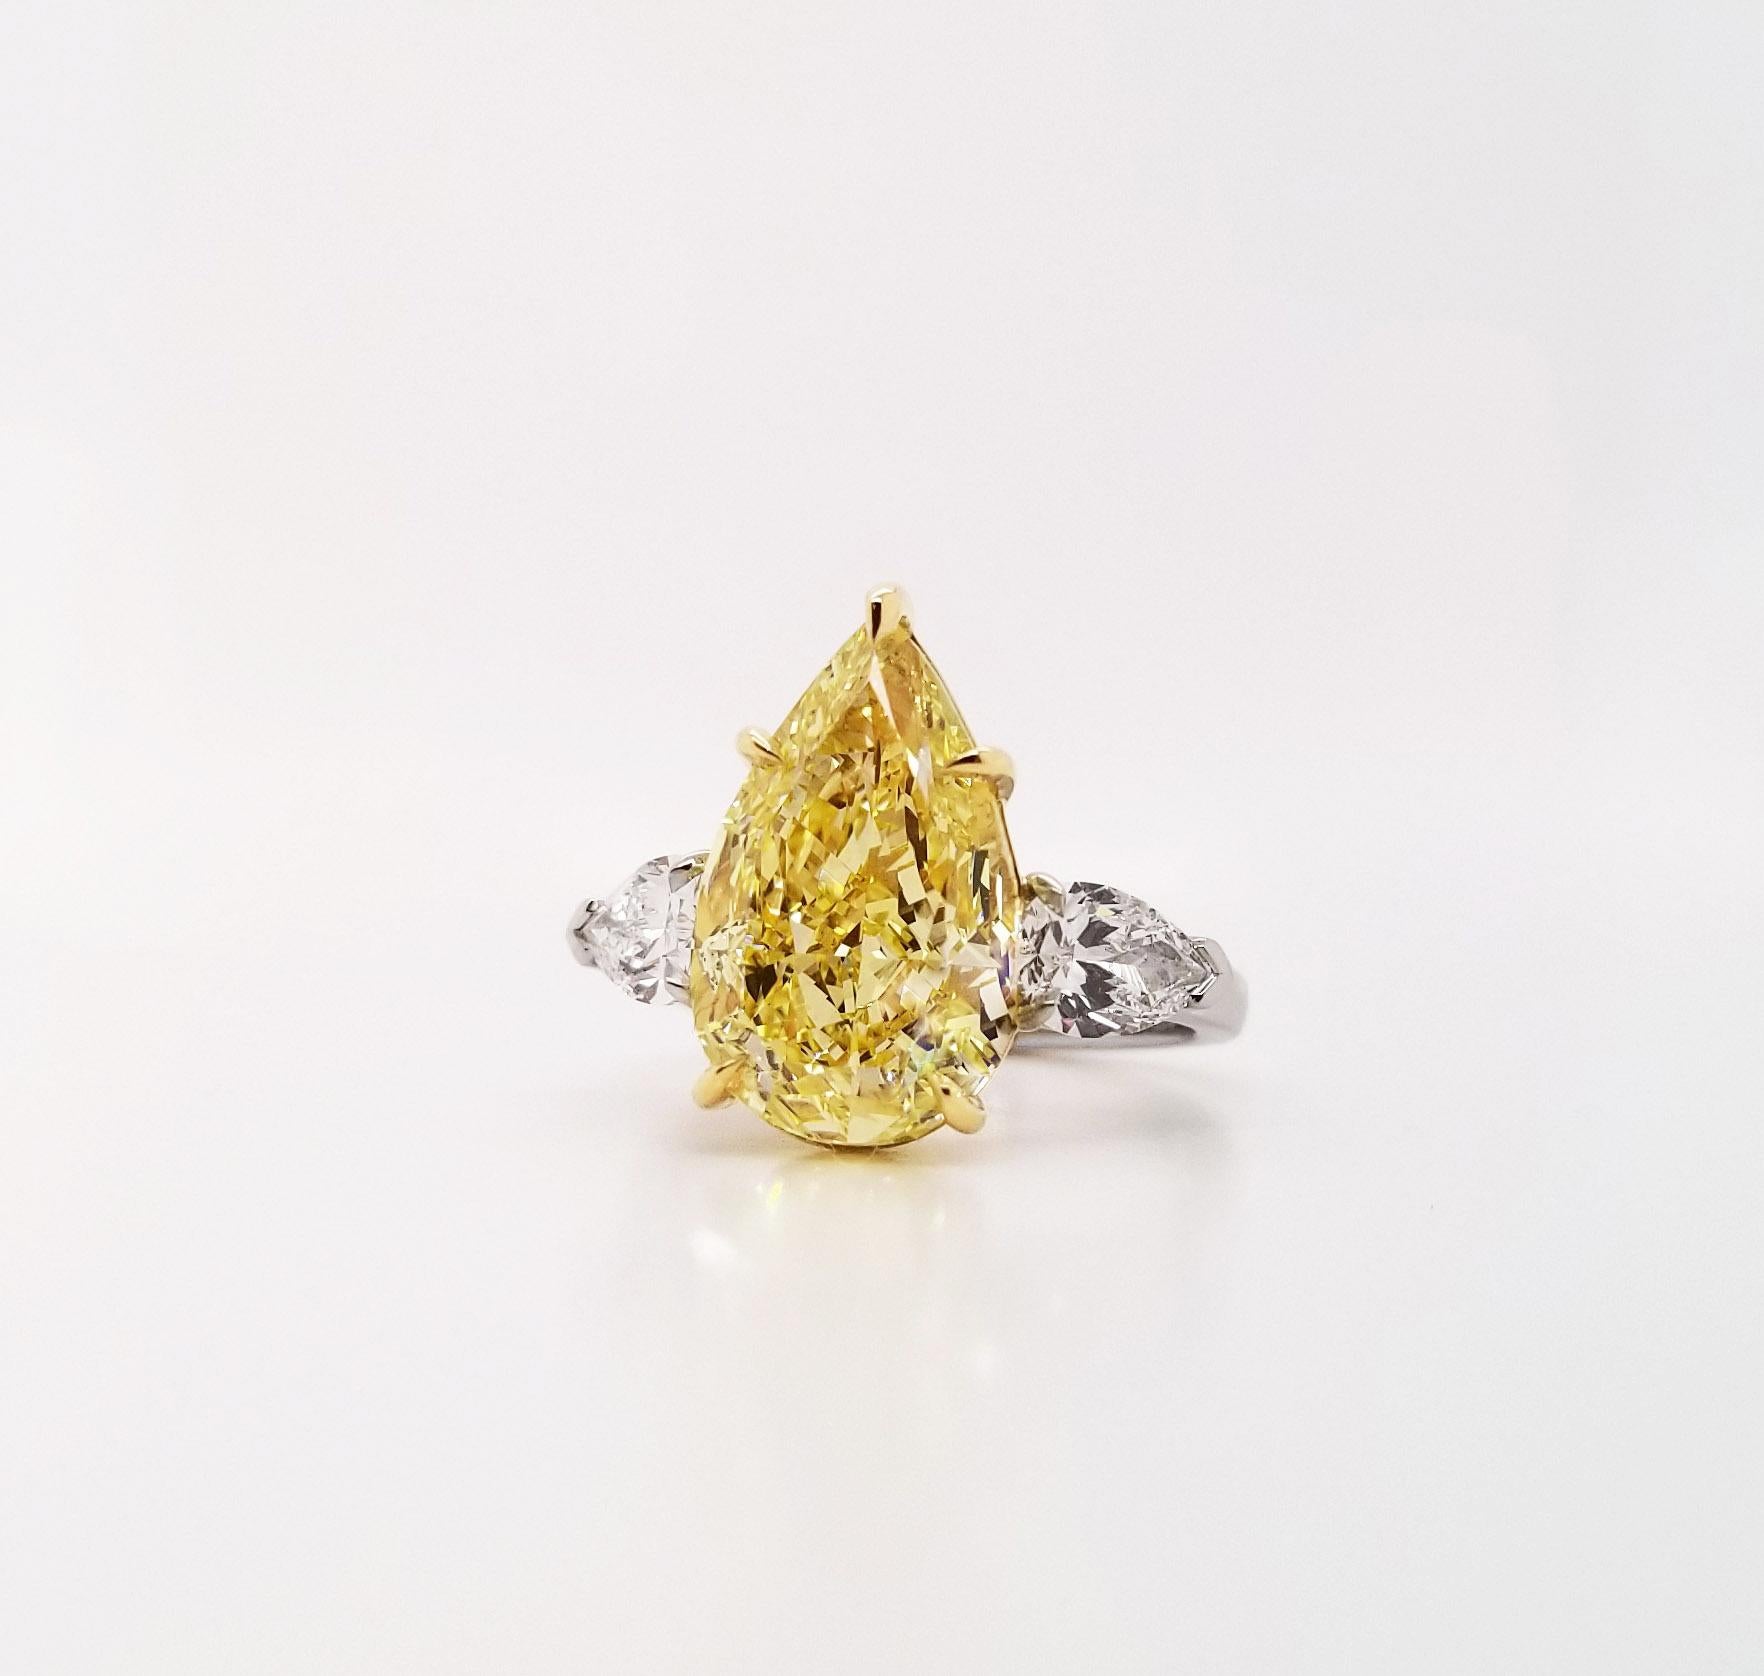 Contemporary Scarselli 5 Carat Pear Shape Fancy Yellow Diamond Engagement Ring